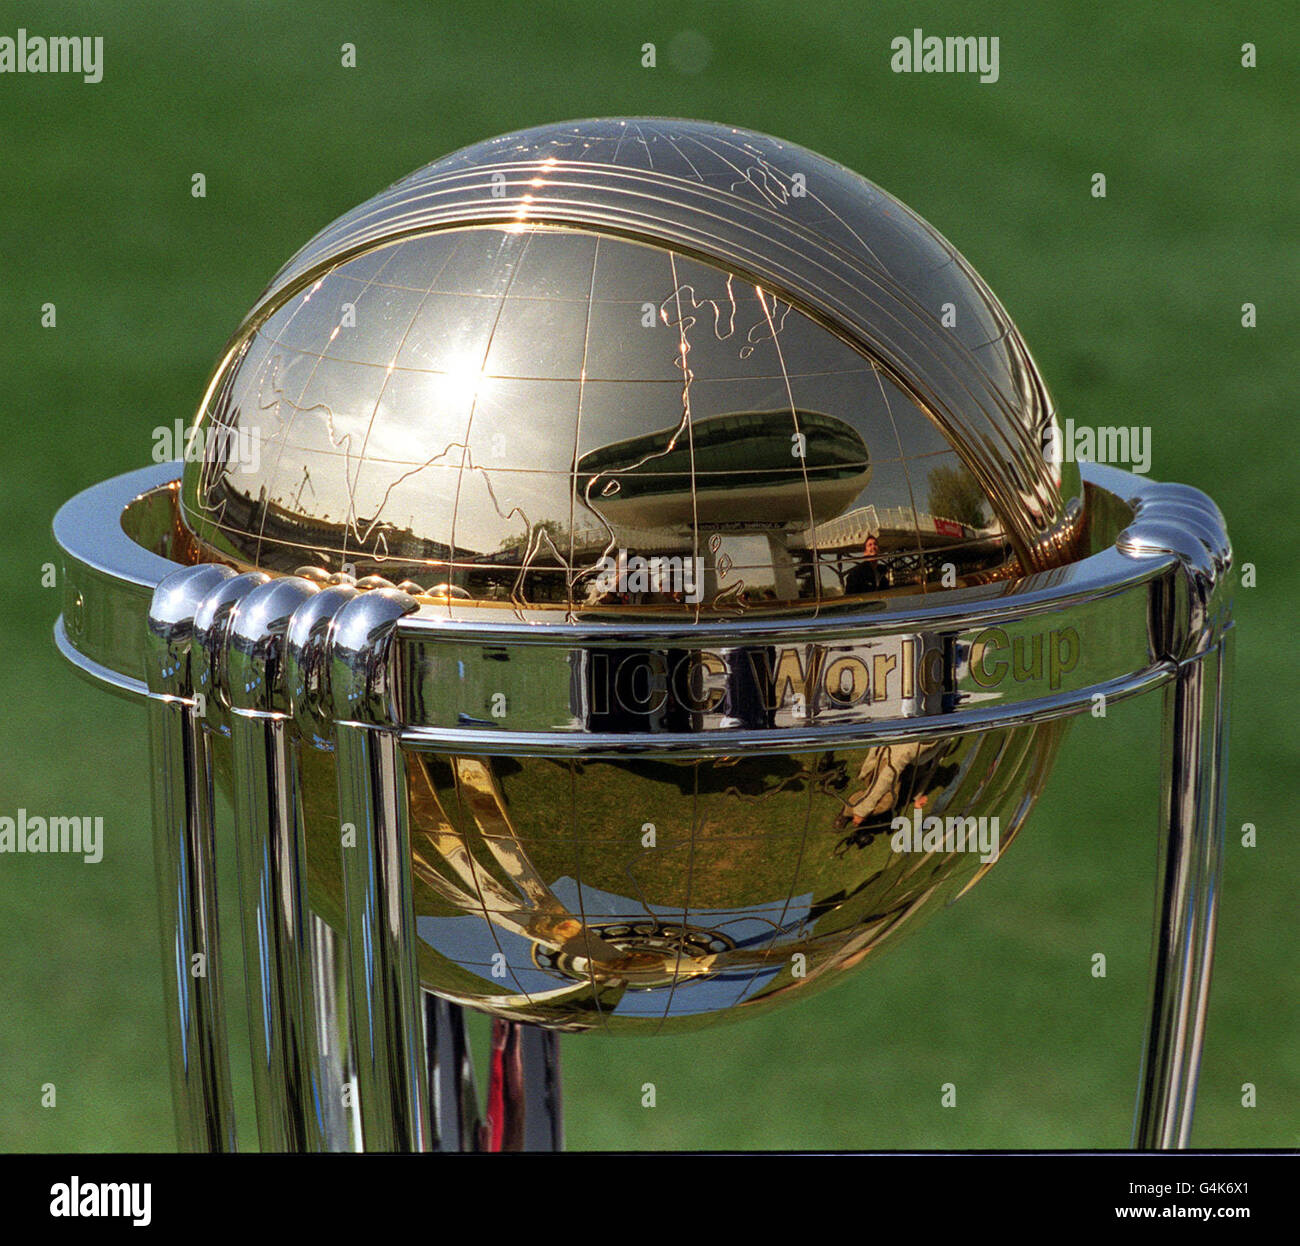 The cricket World Cup trophy reflects the new Natwest Media Centre, during a photocall at Lord's Cricket ground in London. The Cricket World Cup tournament is due to start in England on May 14. Stock Photo